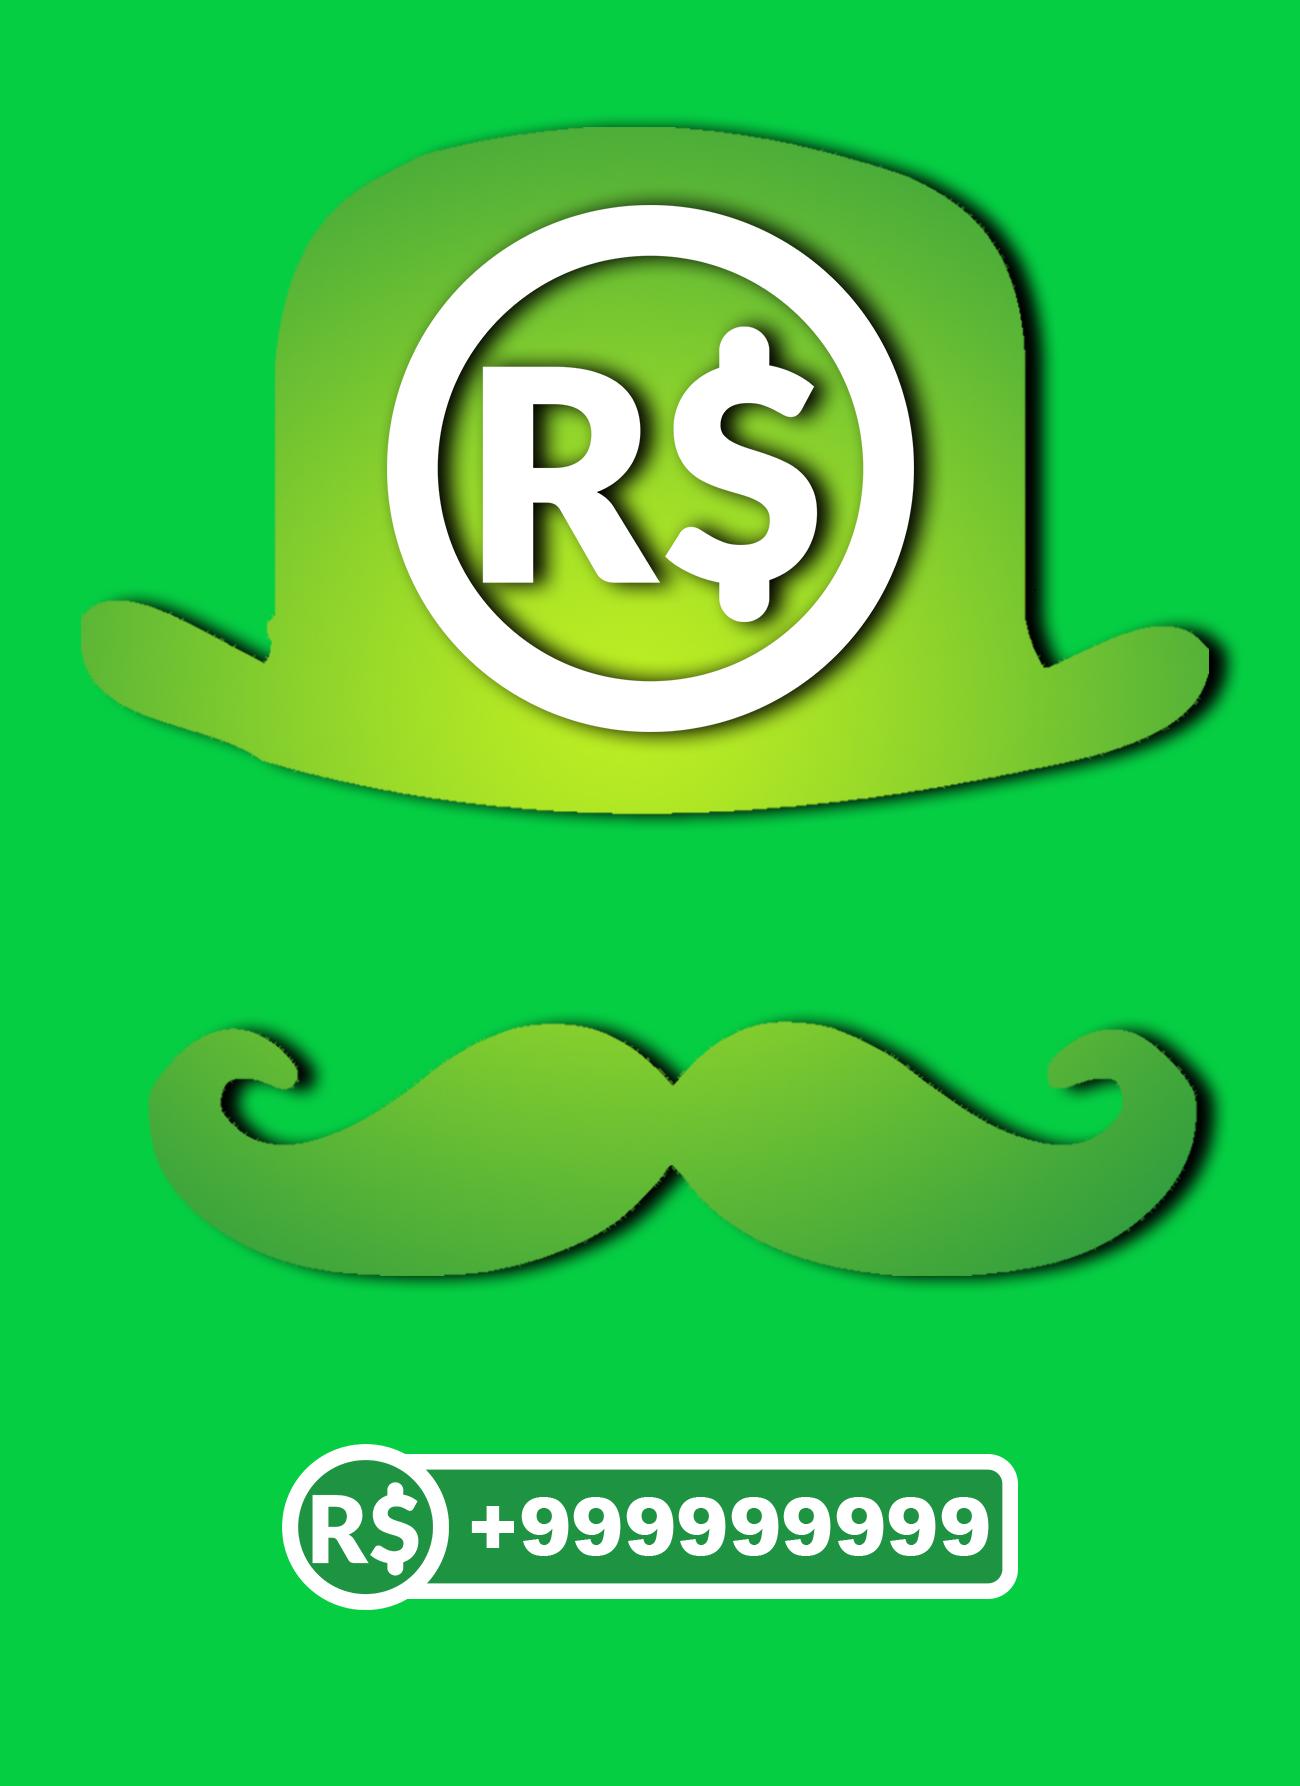 Free Robux For Roblox Calculator Robux Validator For Android - el simbolo de robux